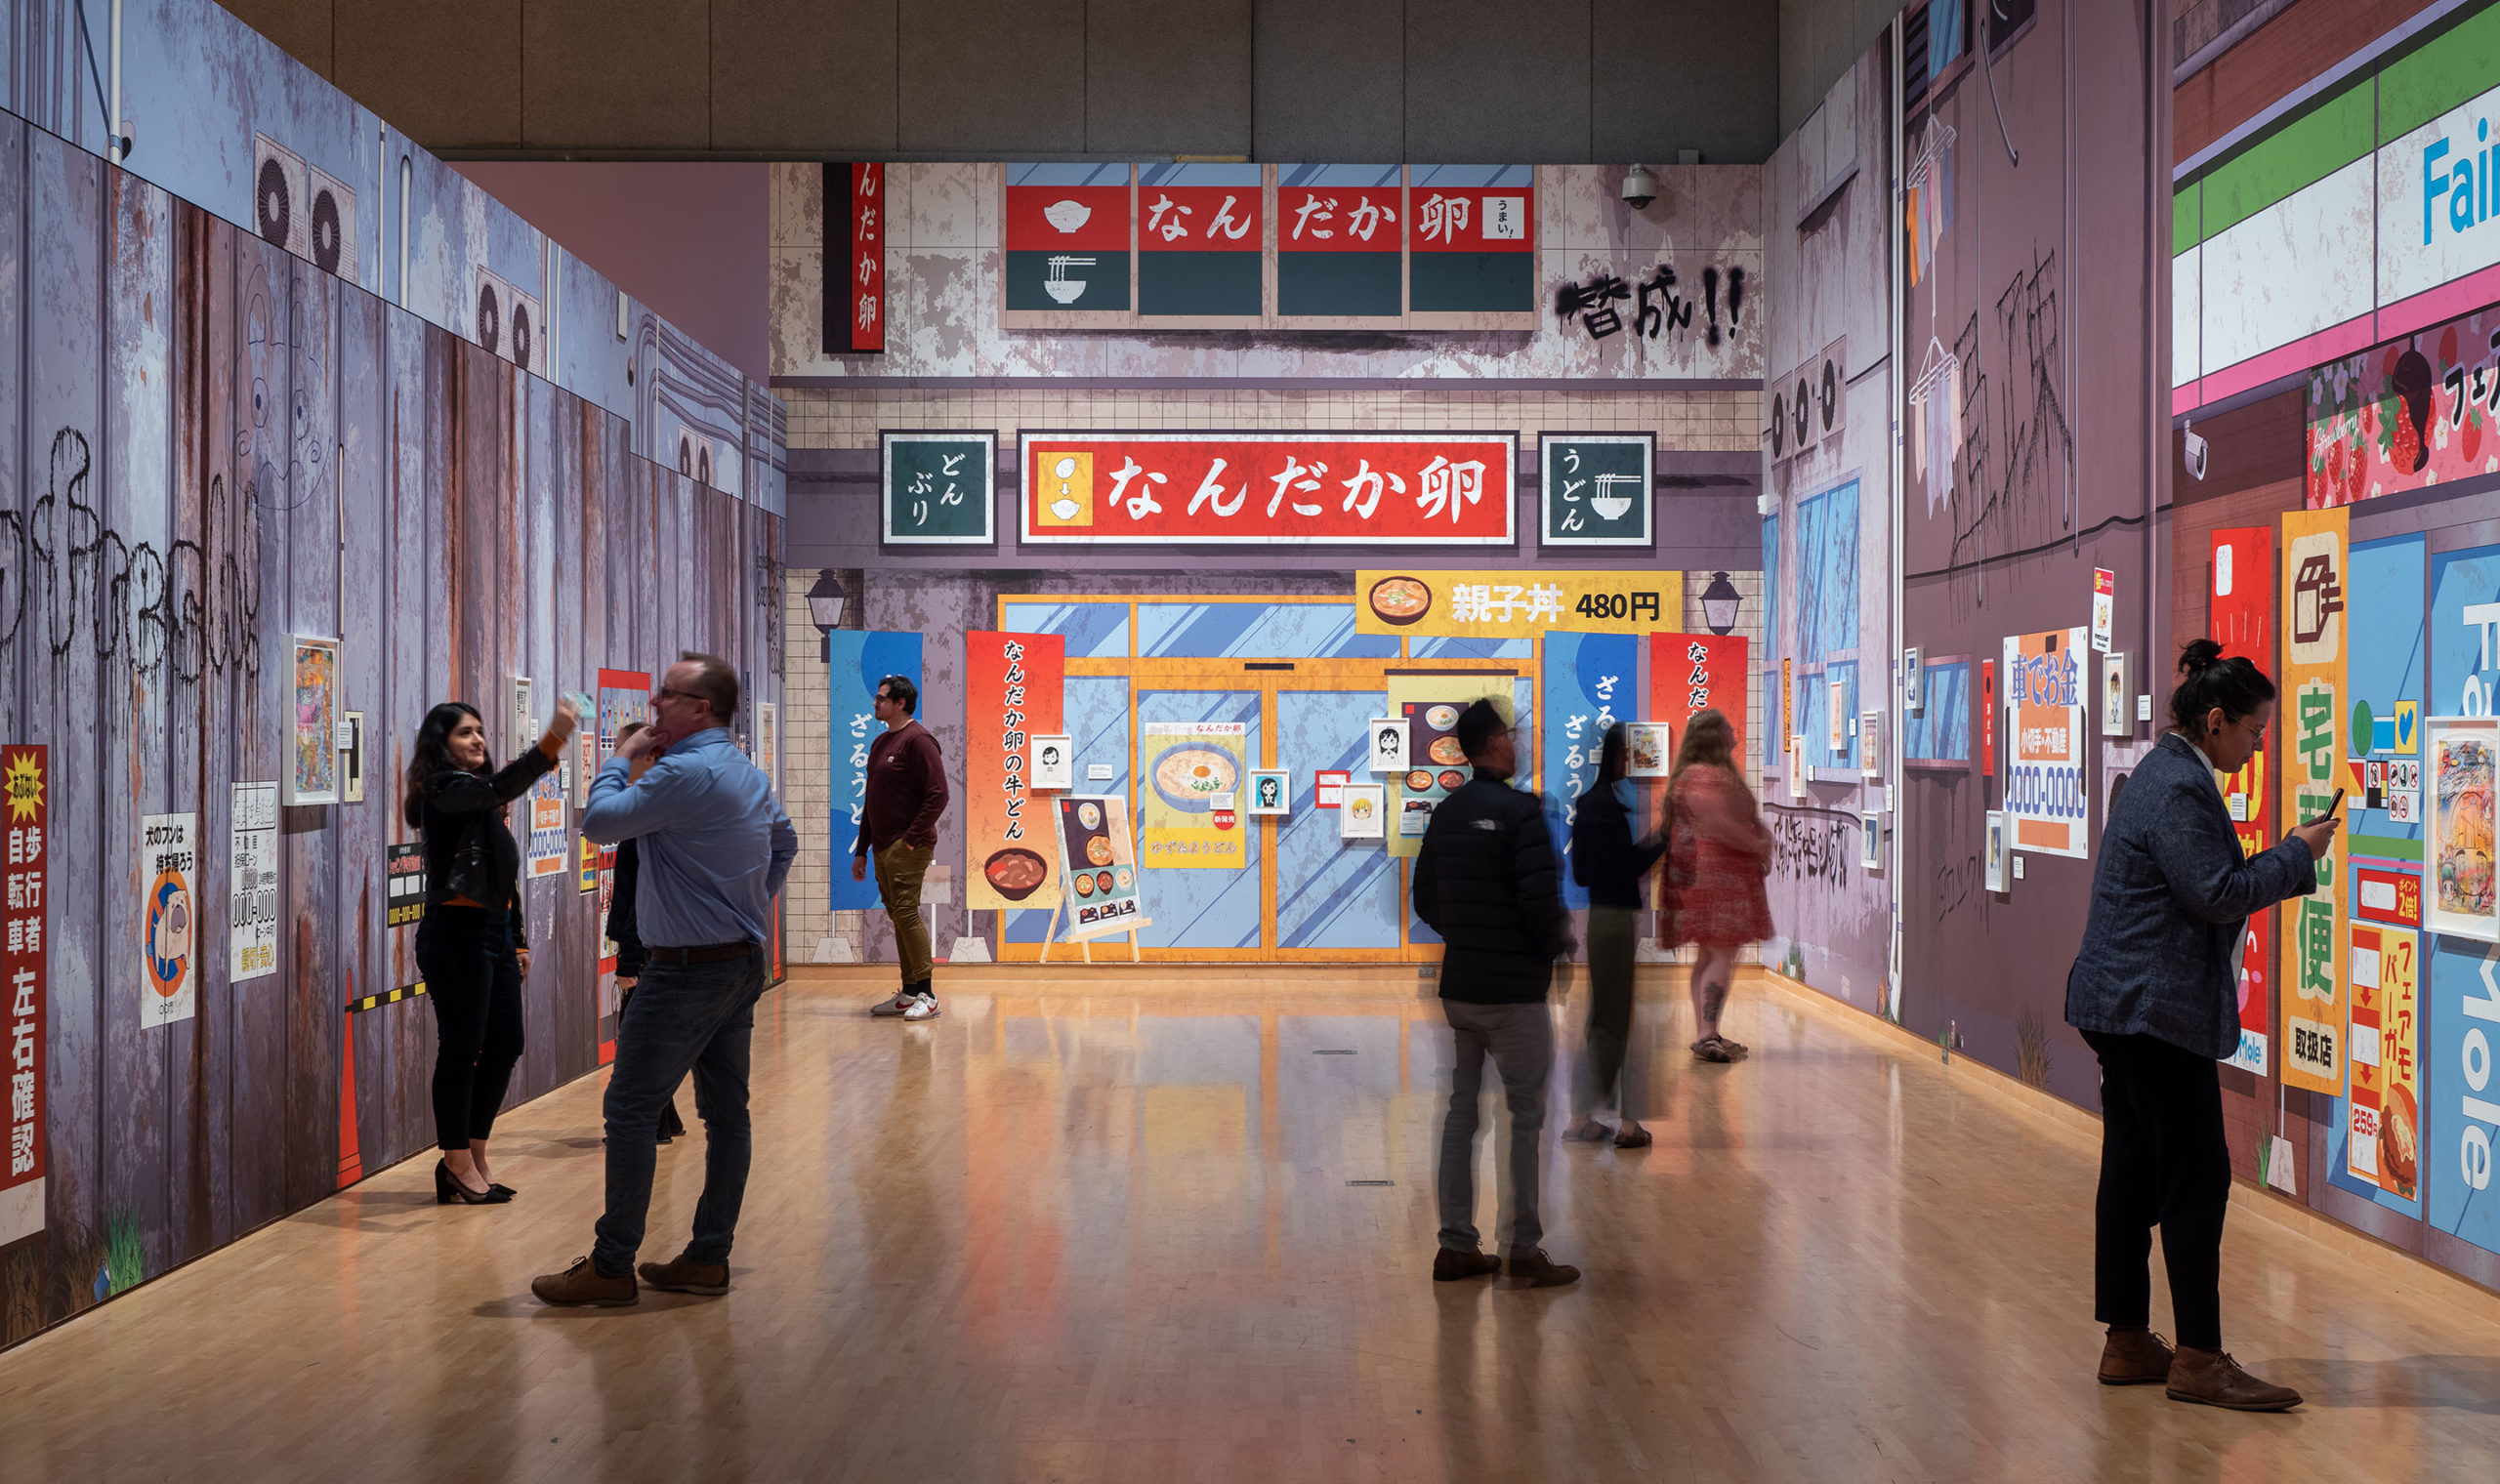 Installation view, Mr.: You Can Hear the Song of This Town, 2022, Phoenix Art Museum. ©Mr./Kaikai Kiki Co., Ltd. All Rights Reserved.